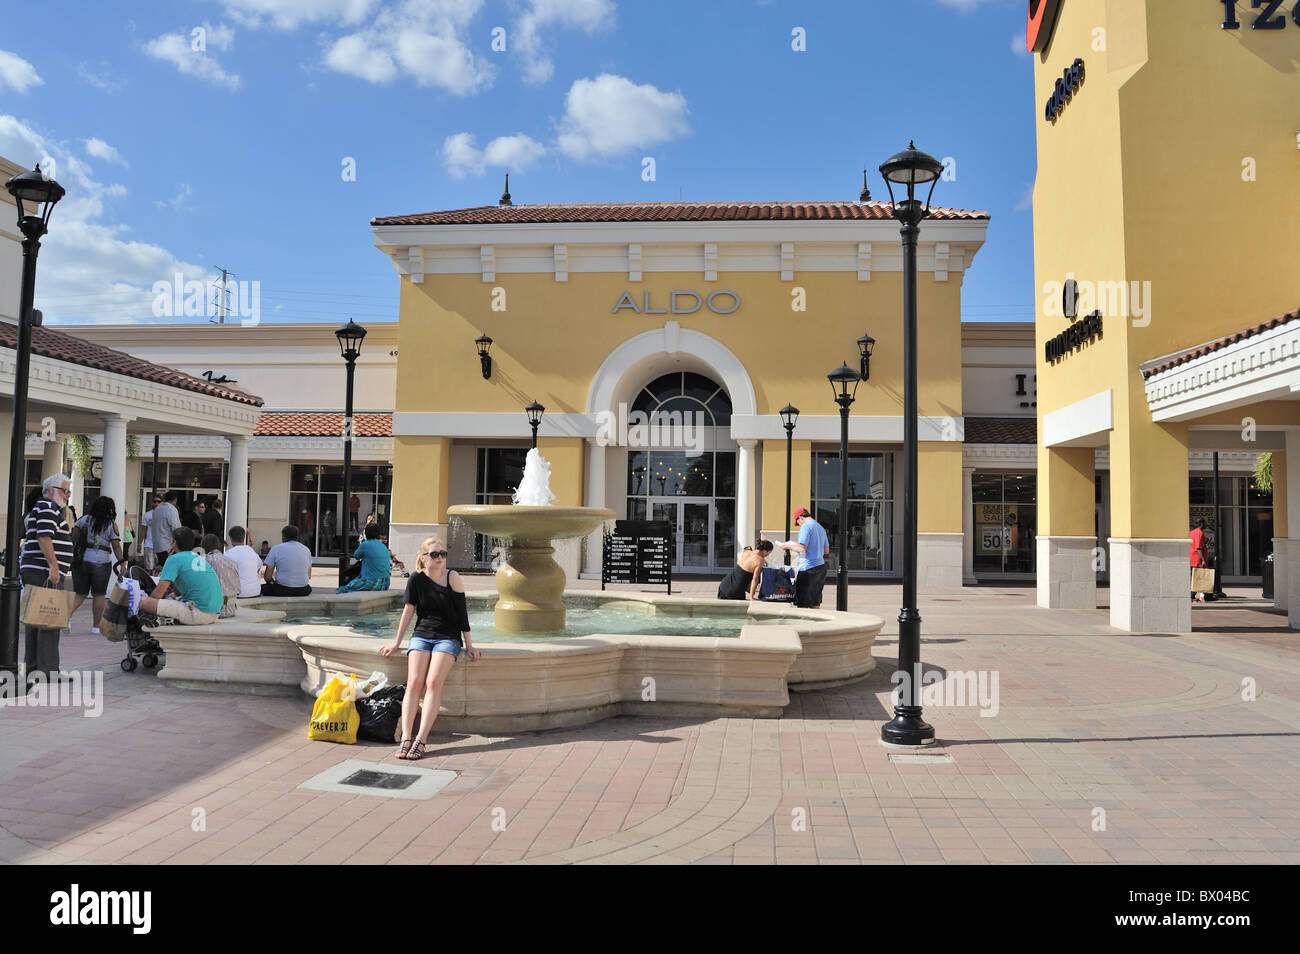 Prime Outlets shopping center International Drive Florida Stock Photo